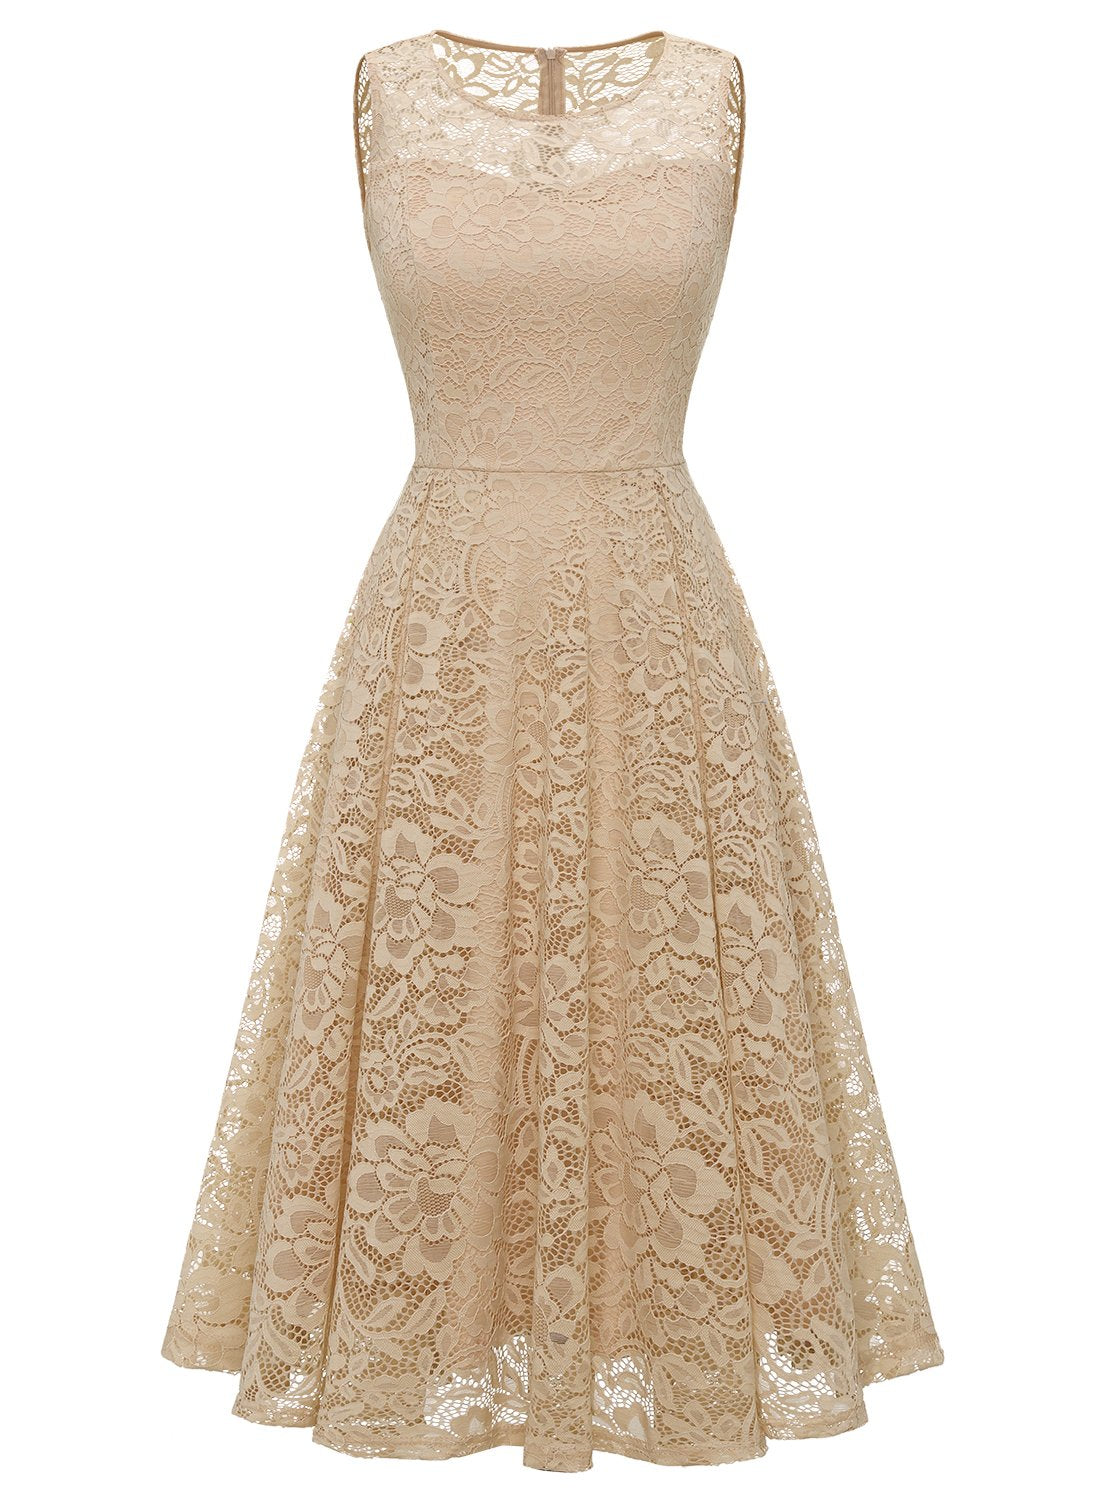 Champagne Lace Dress with Pockets